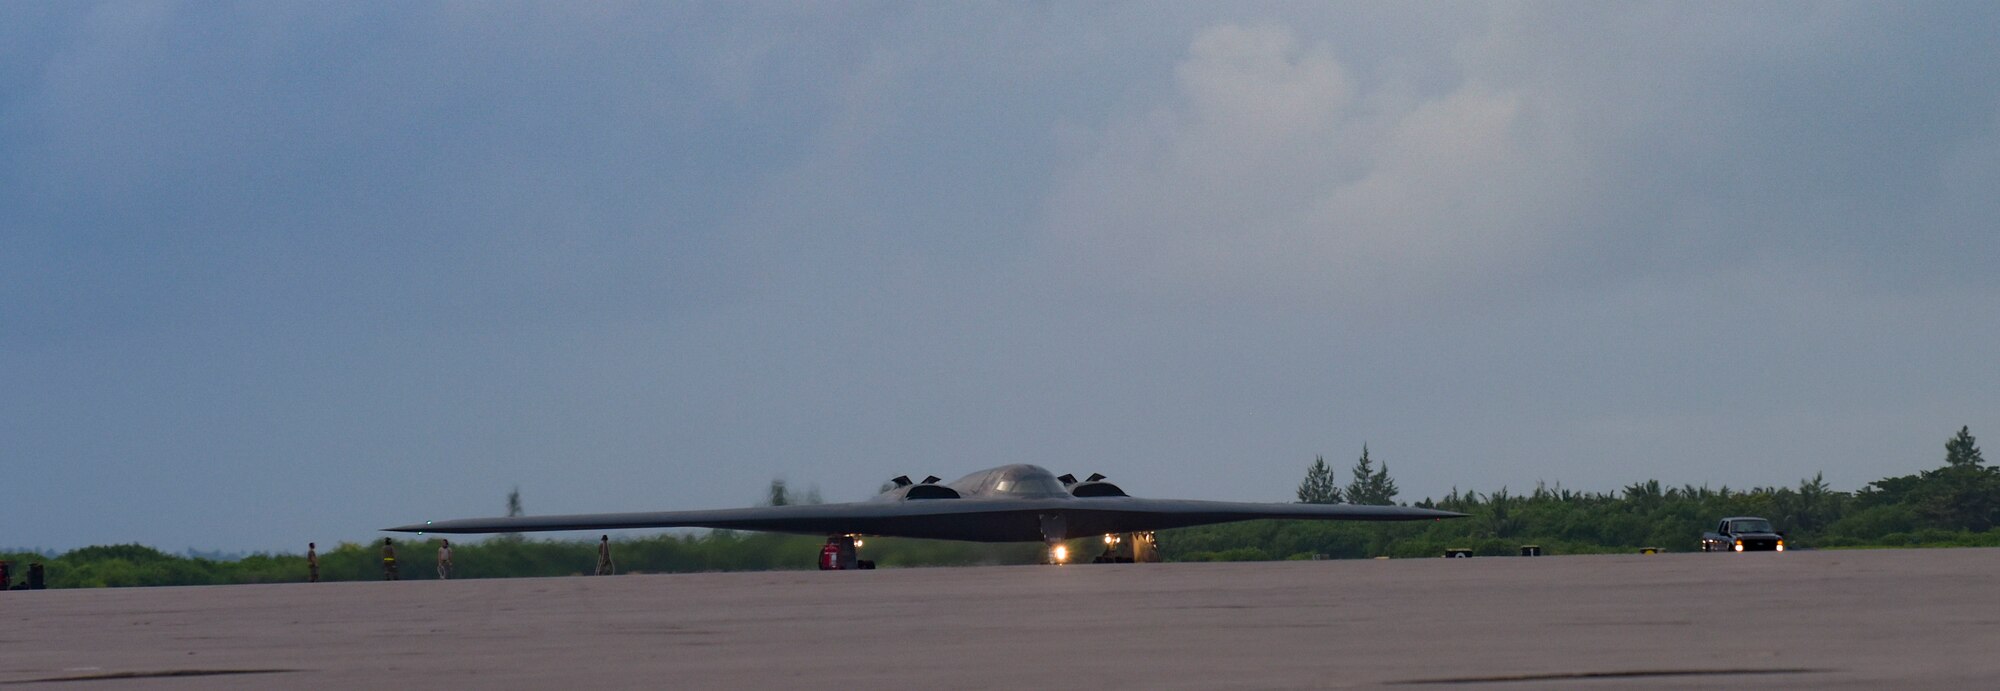 U.S. Air Force maintainers assigned to the 393rd Expeditionary Bomb Squadron, Whiteman Air Force Base, Missouri, taxi in the B-2 Spirit Stealth Bomber at Naval Support Facility Diego Garcia, to support a Bomber Task Force mission, Aug. 14, 2020.  As part of their BTF deployment, the B-2s participated in a combined United States-Australia exercise with Marine Rotational Force -Darwin and Australian Defence Forces. During the exercise, MRF-D and ADF Joint Terminal Attack Controllers coordinated airstrikes with U.S. Air Force B-1B Lancers and B-2 Spirit Stealth Bombers. (U.S. Air Force photo by Senior Airman Alexandria Lee)